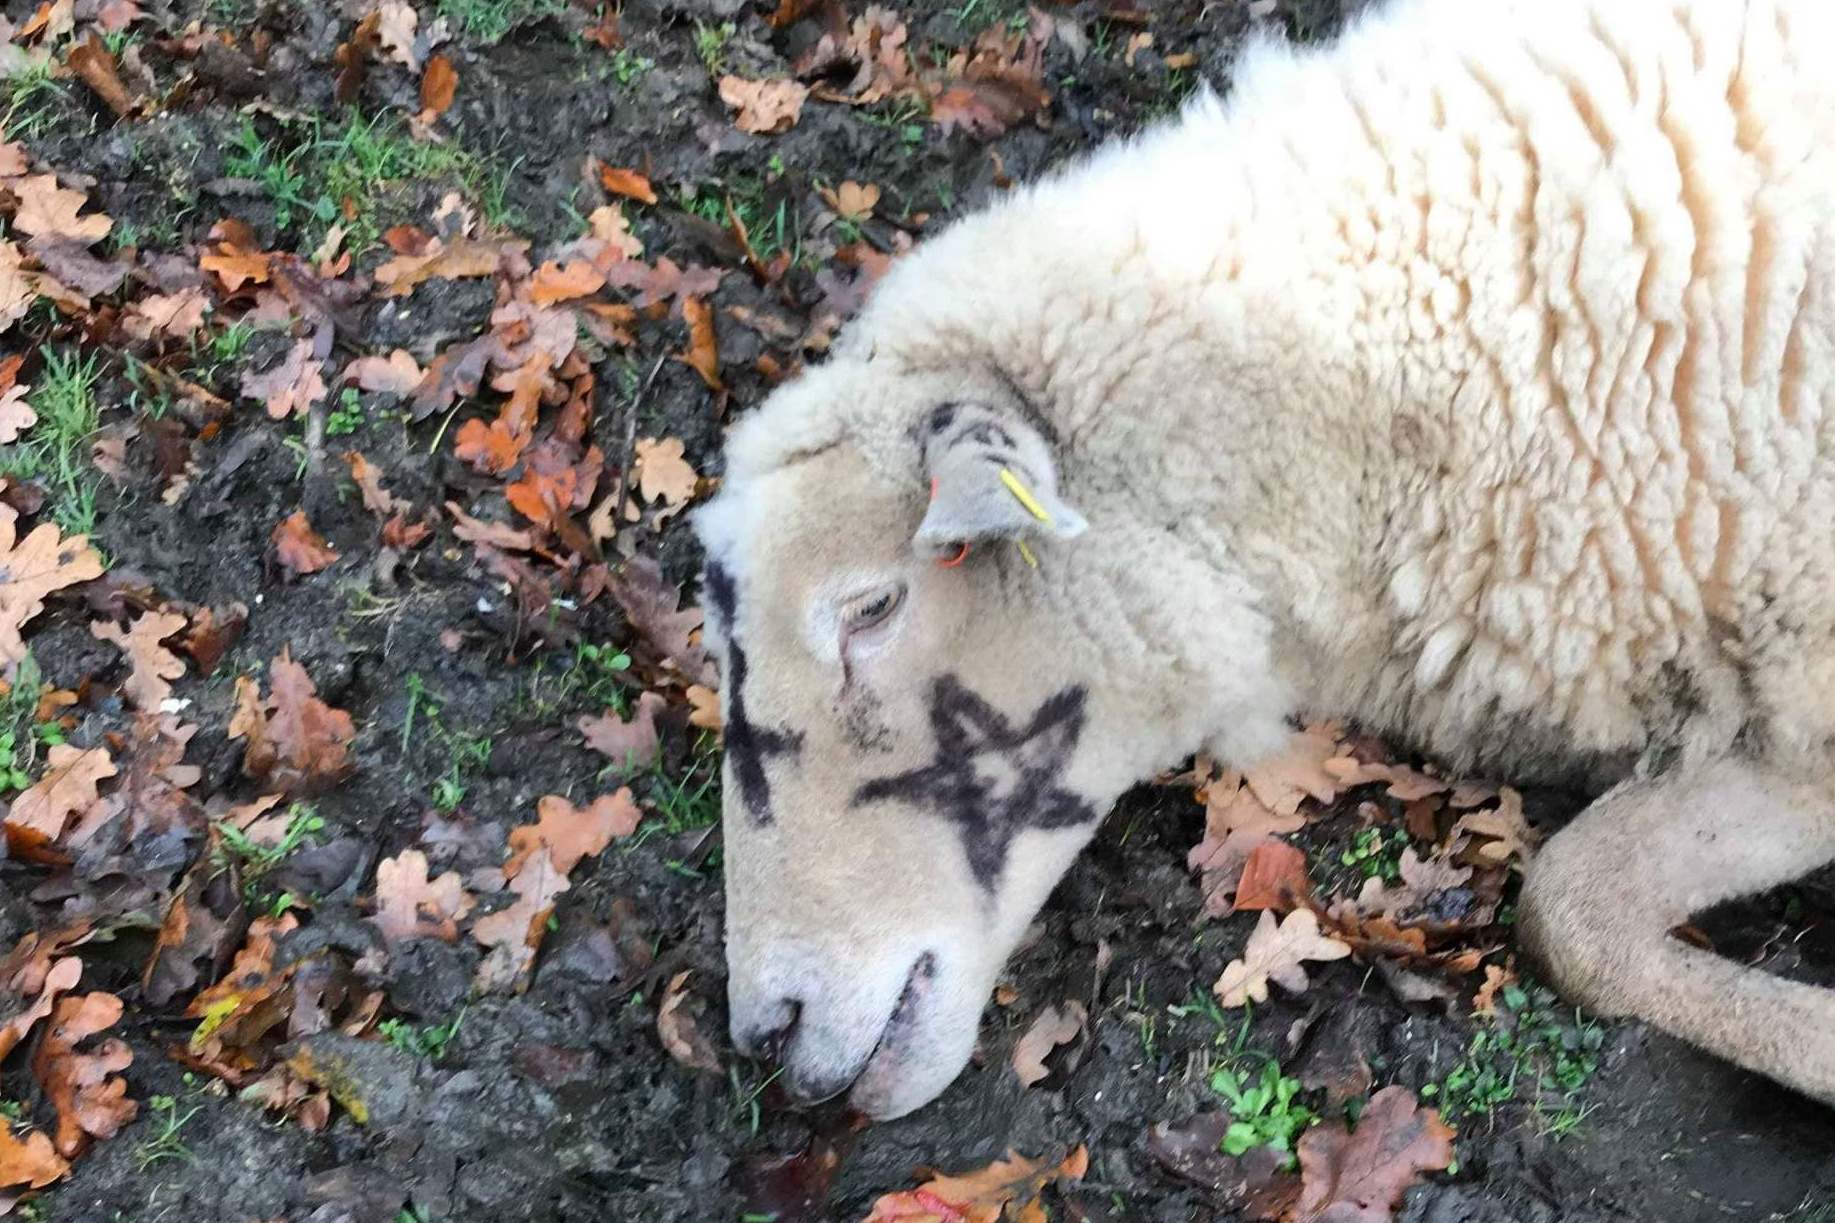 'Occult' killings: Man arrested over 'Satanic' sheep deaths in New Forest